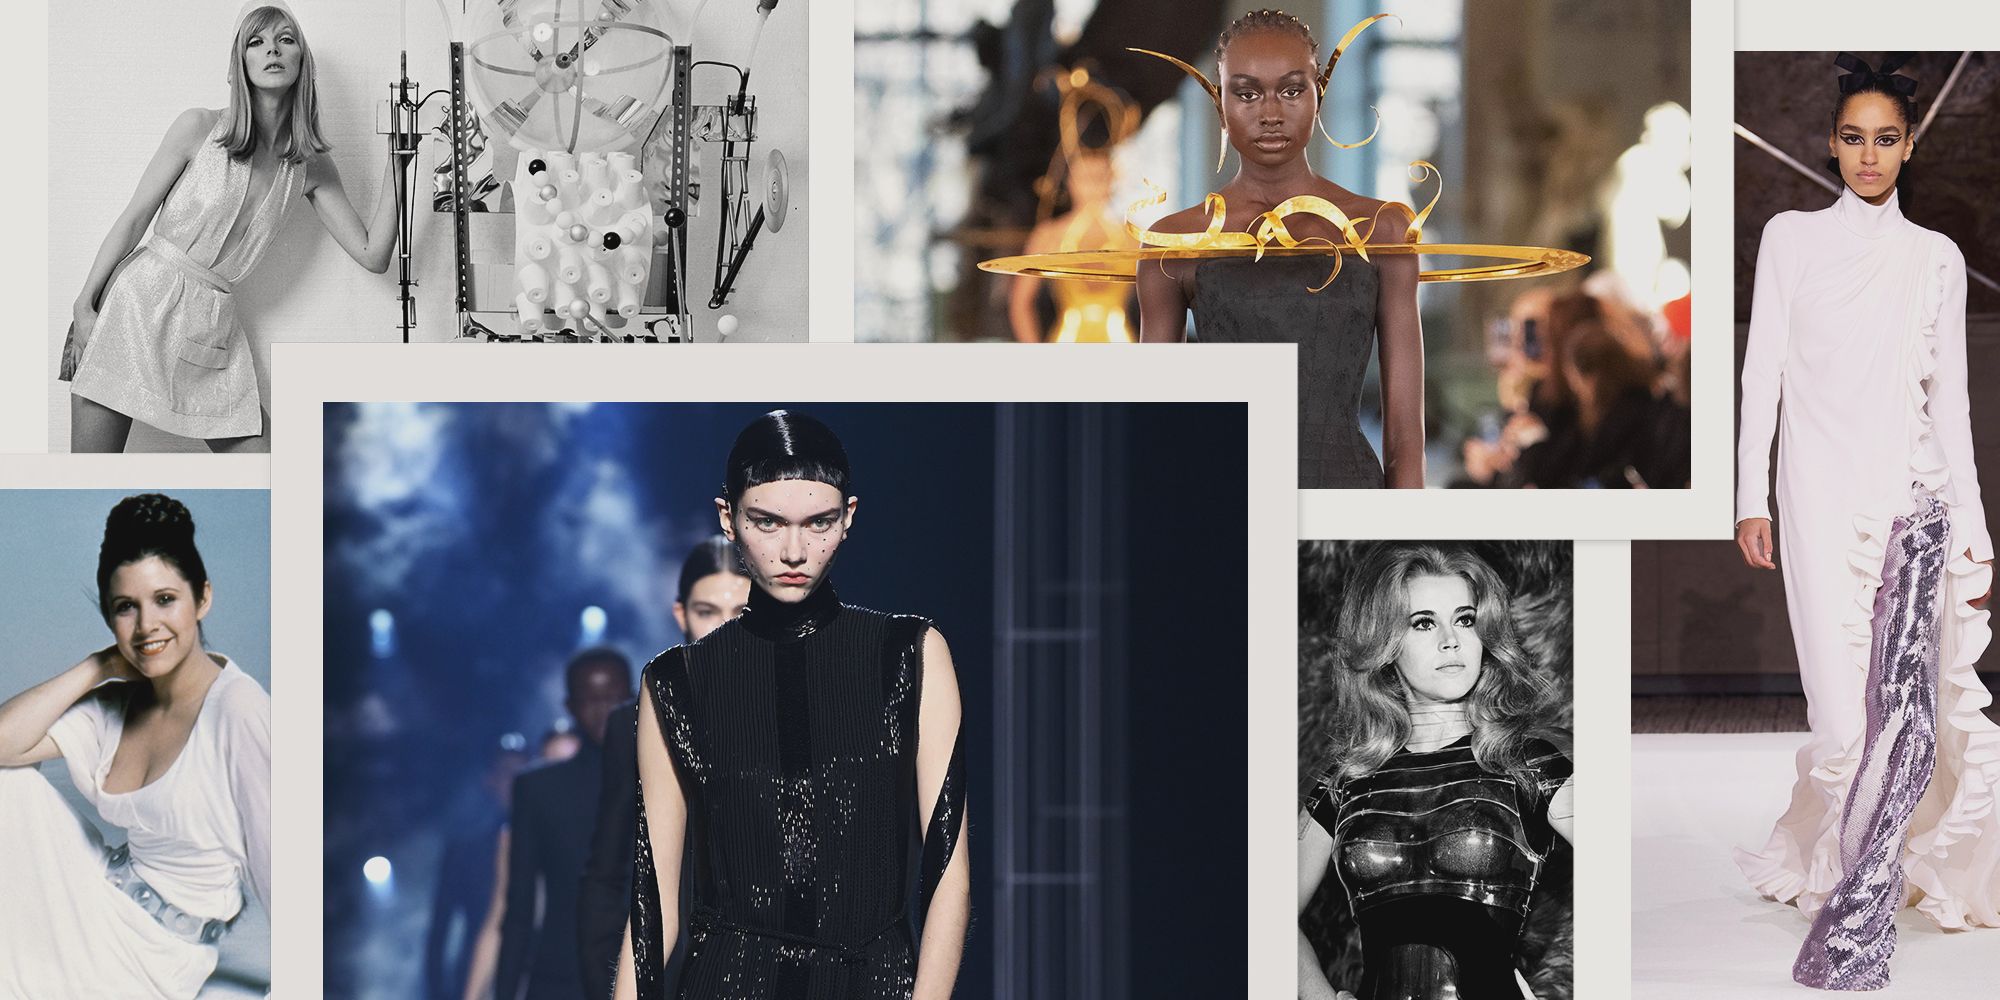 Fashion From Another Galaxy: Futuristic Styles Explored